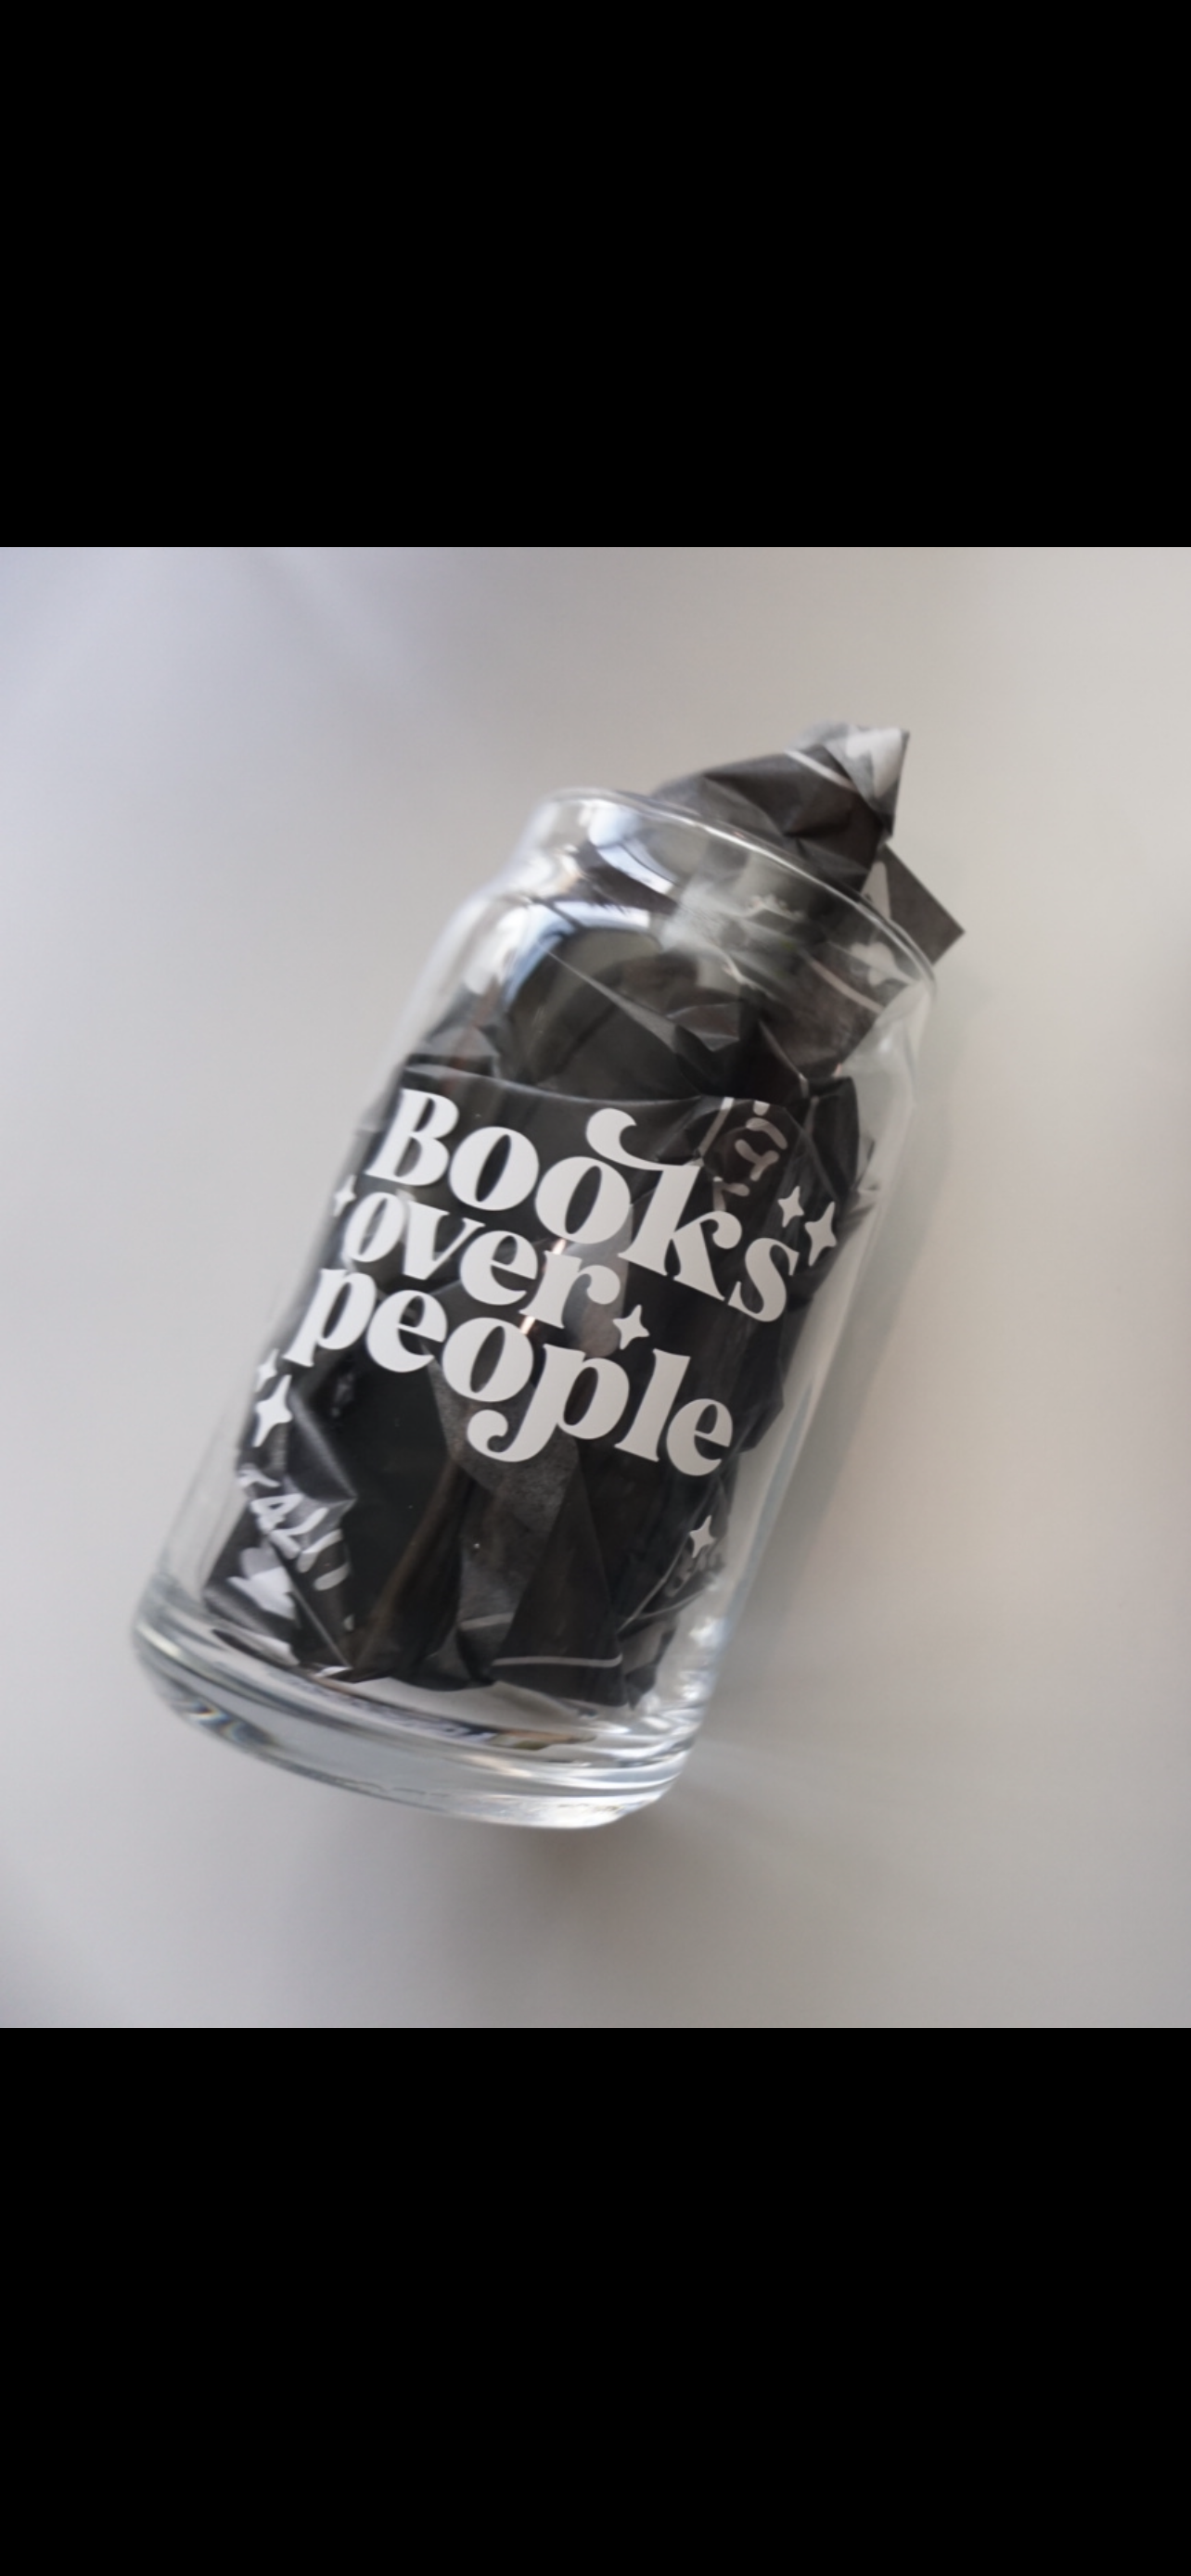 Books over people